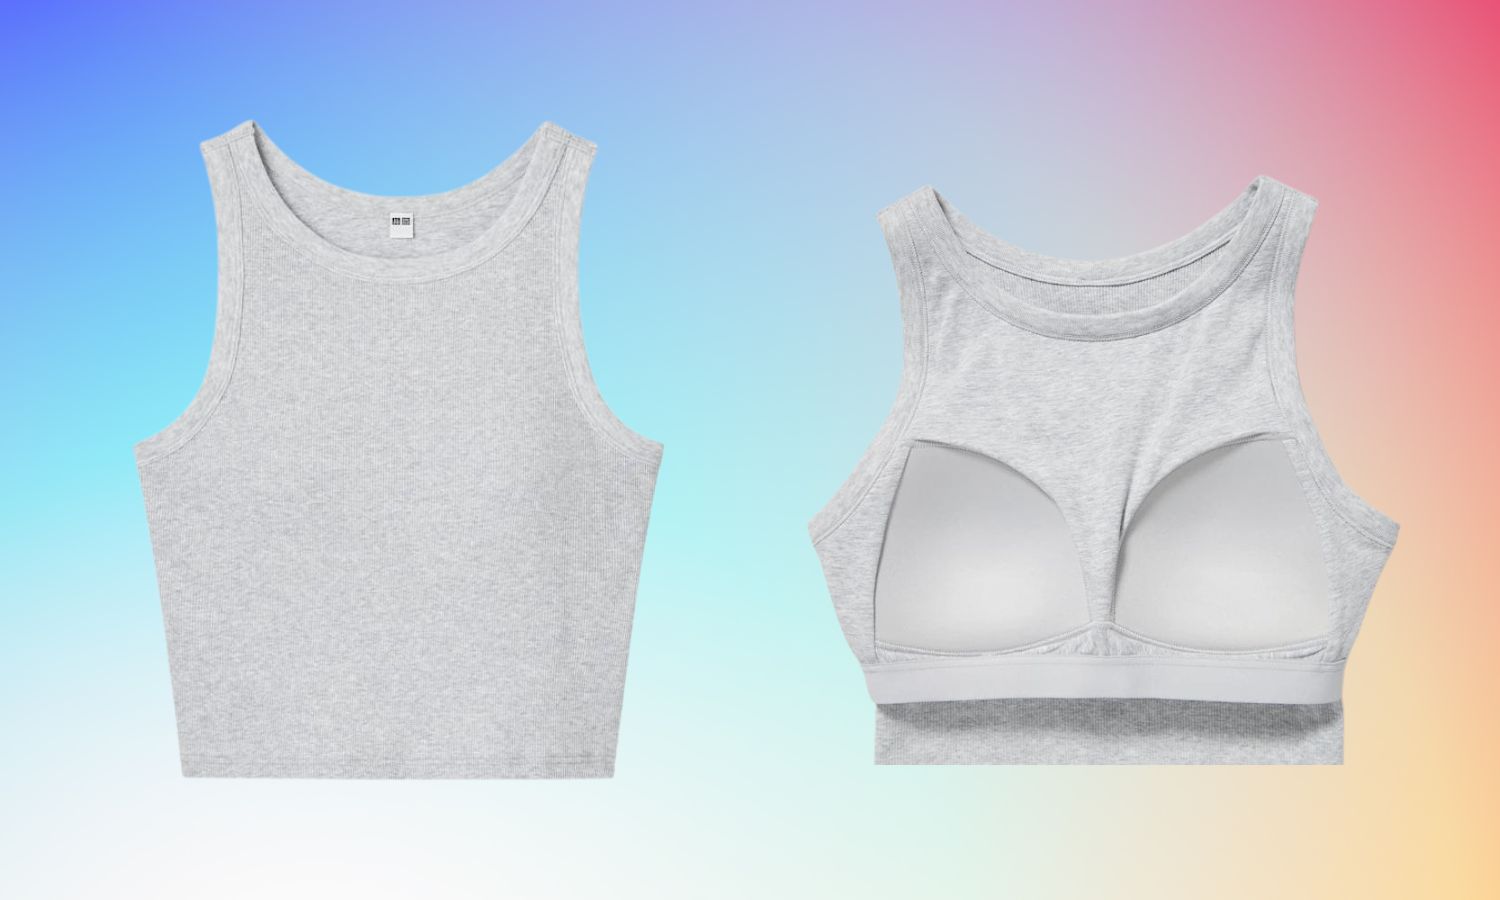 Grab the Tank Top With Built-In Bra That TikTok Is Obsessing Over